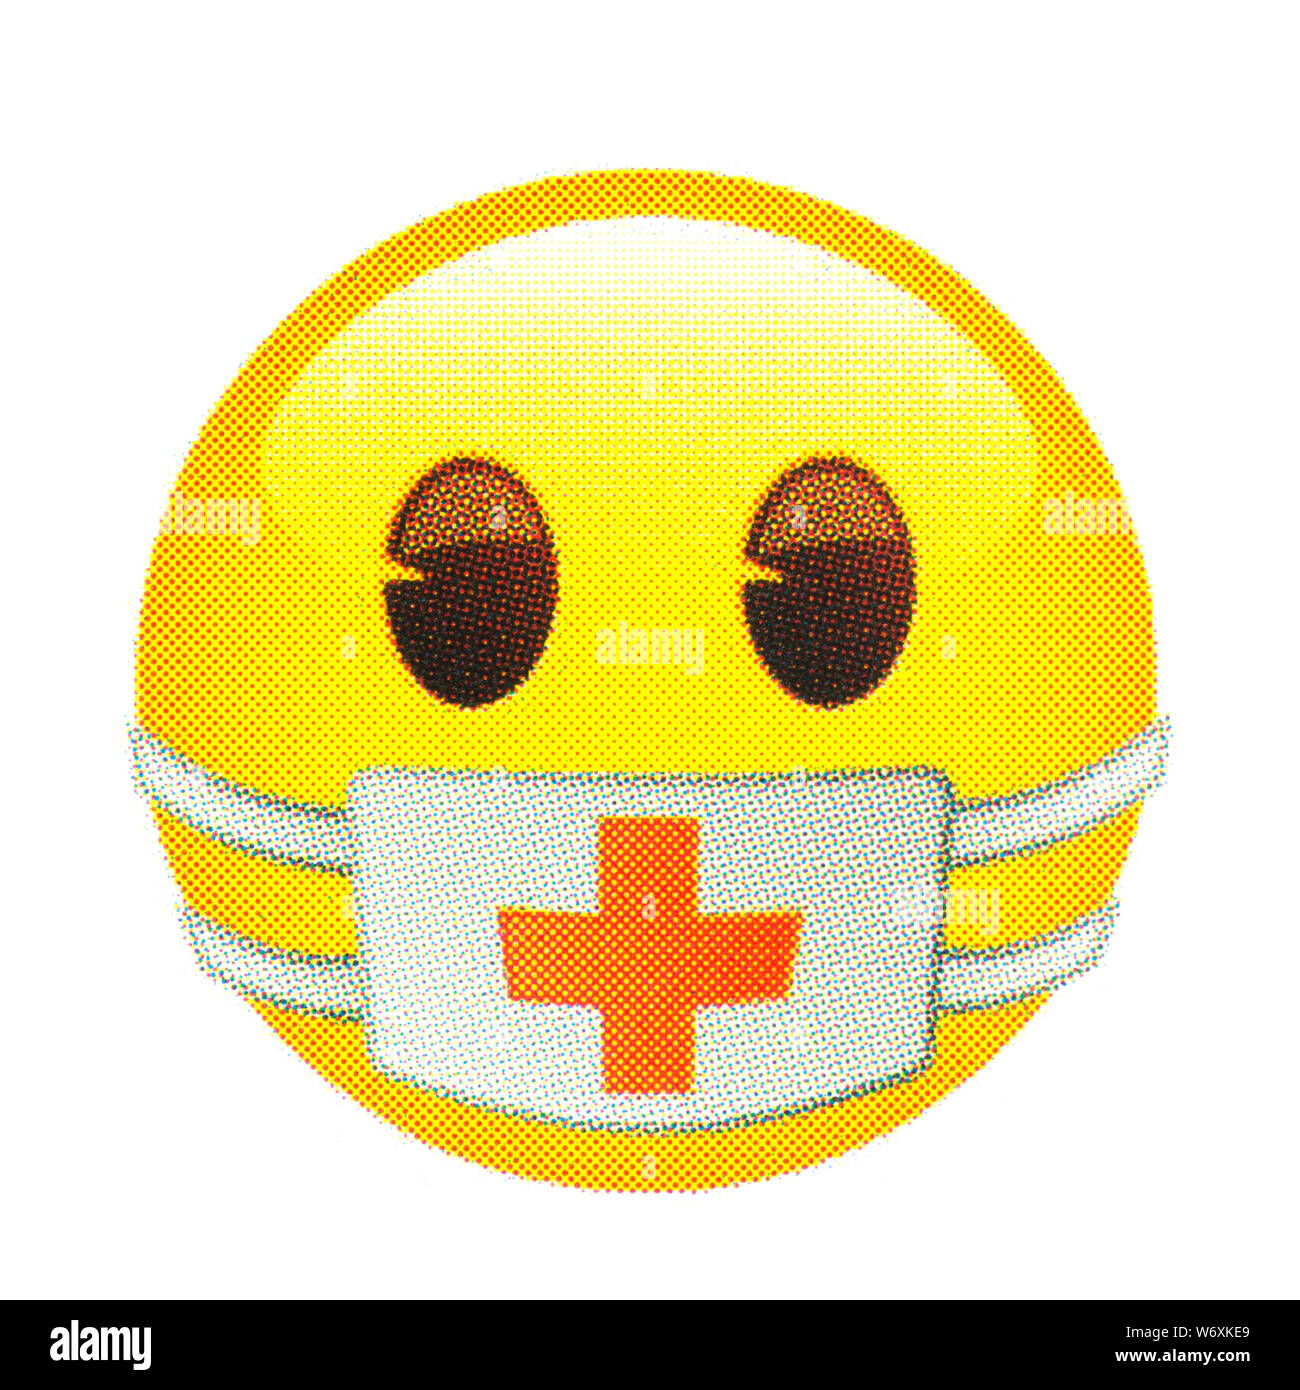 Face with medical mask on mouth emoticon Stock Photo